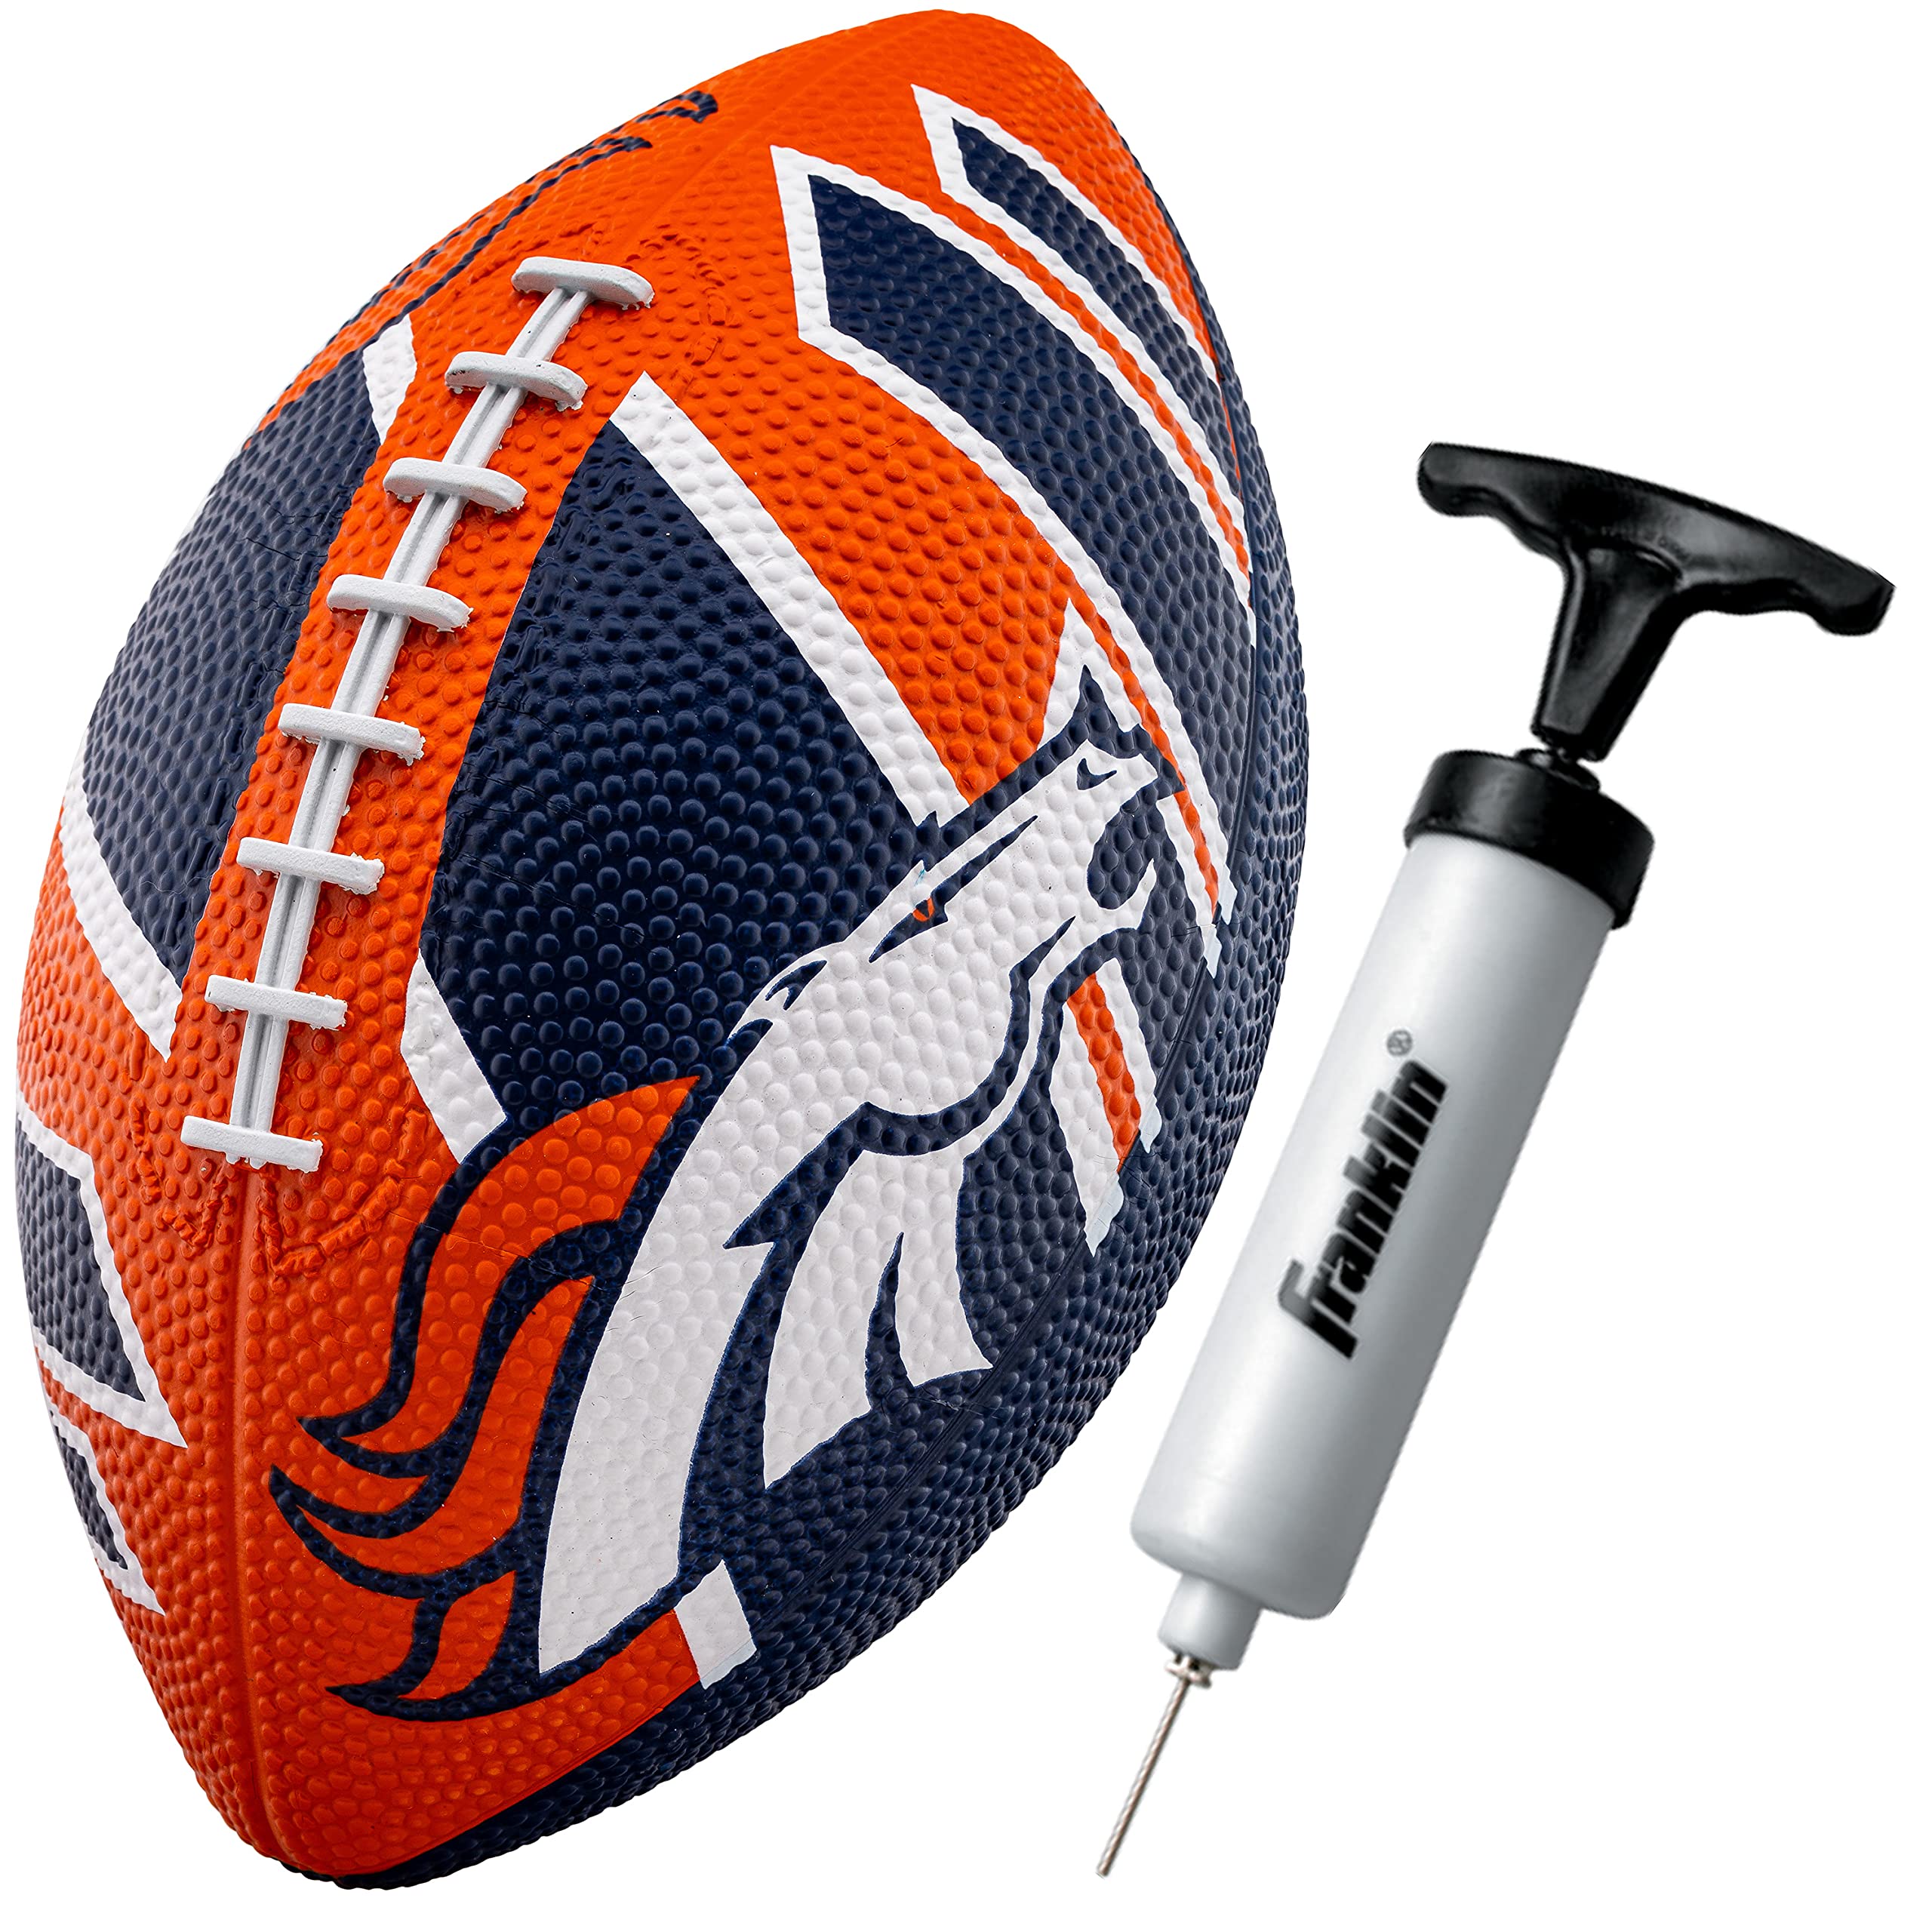 Franklin Sports Nfl Denver Broncos Football - Youth Football - Mini 85 Rubber Football - Perfect For Kids - Team Logos And Color